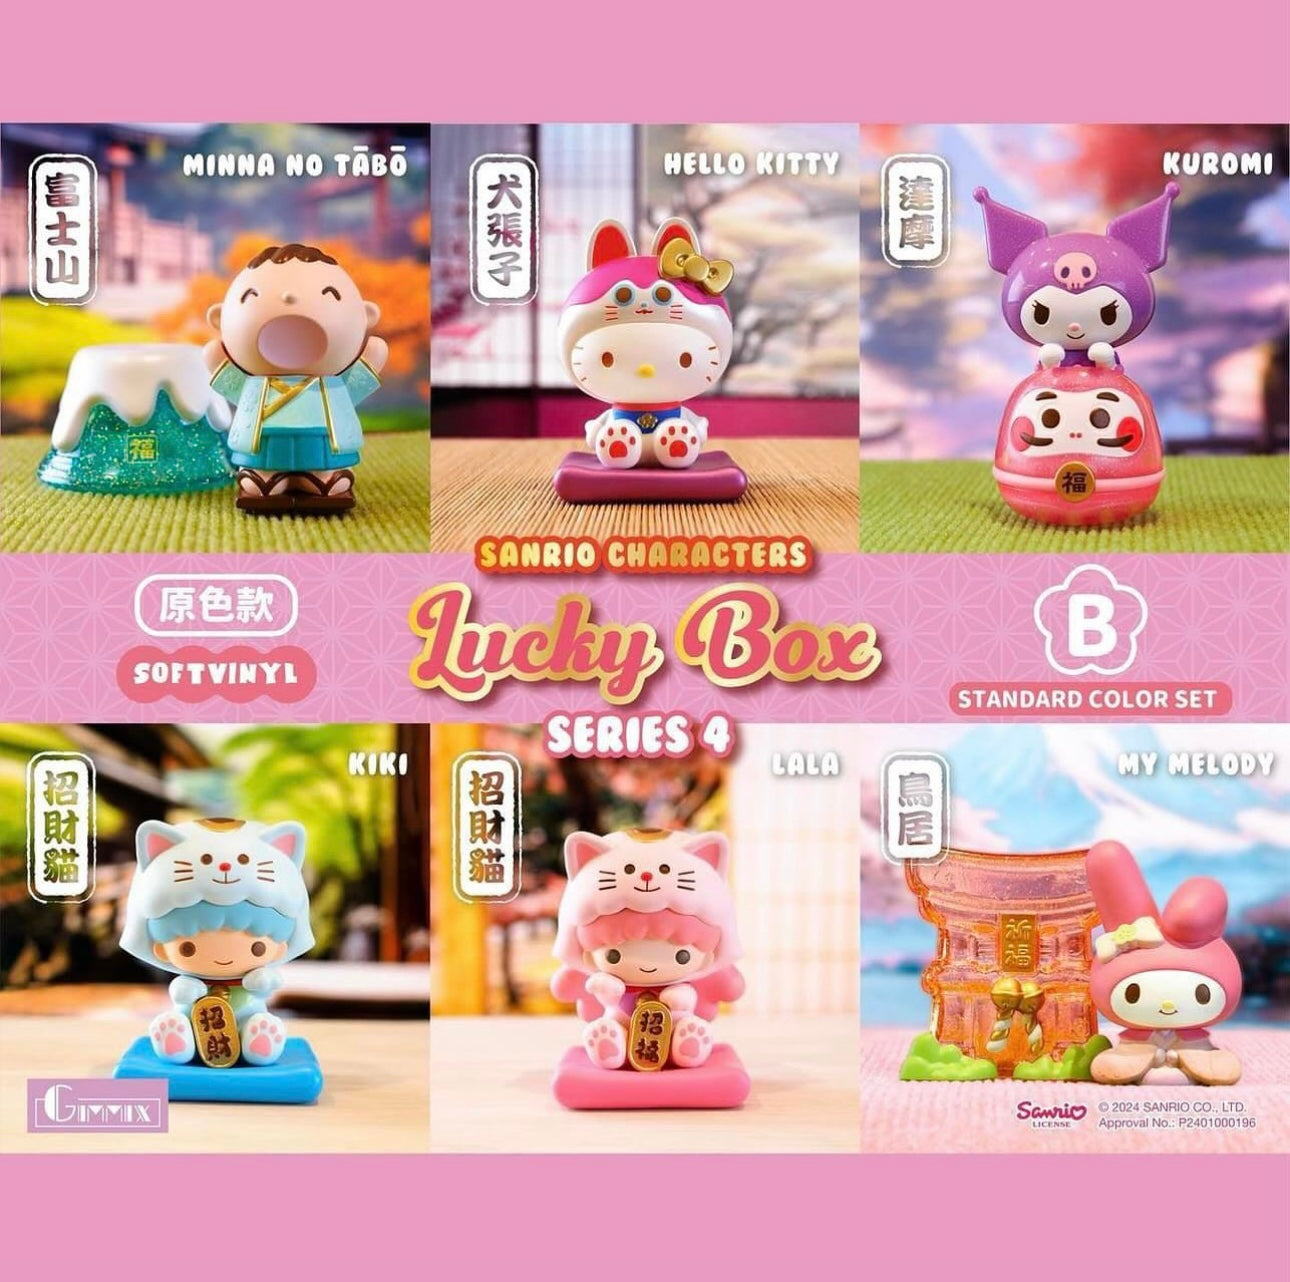 Mystery Blind Box Sanrio Characters Vinly Figure Lucky Box | Series A & B My Melody Torii - Kawaii Collectable Toys